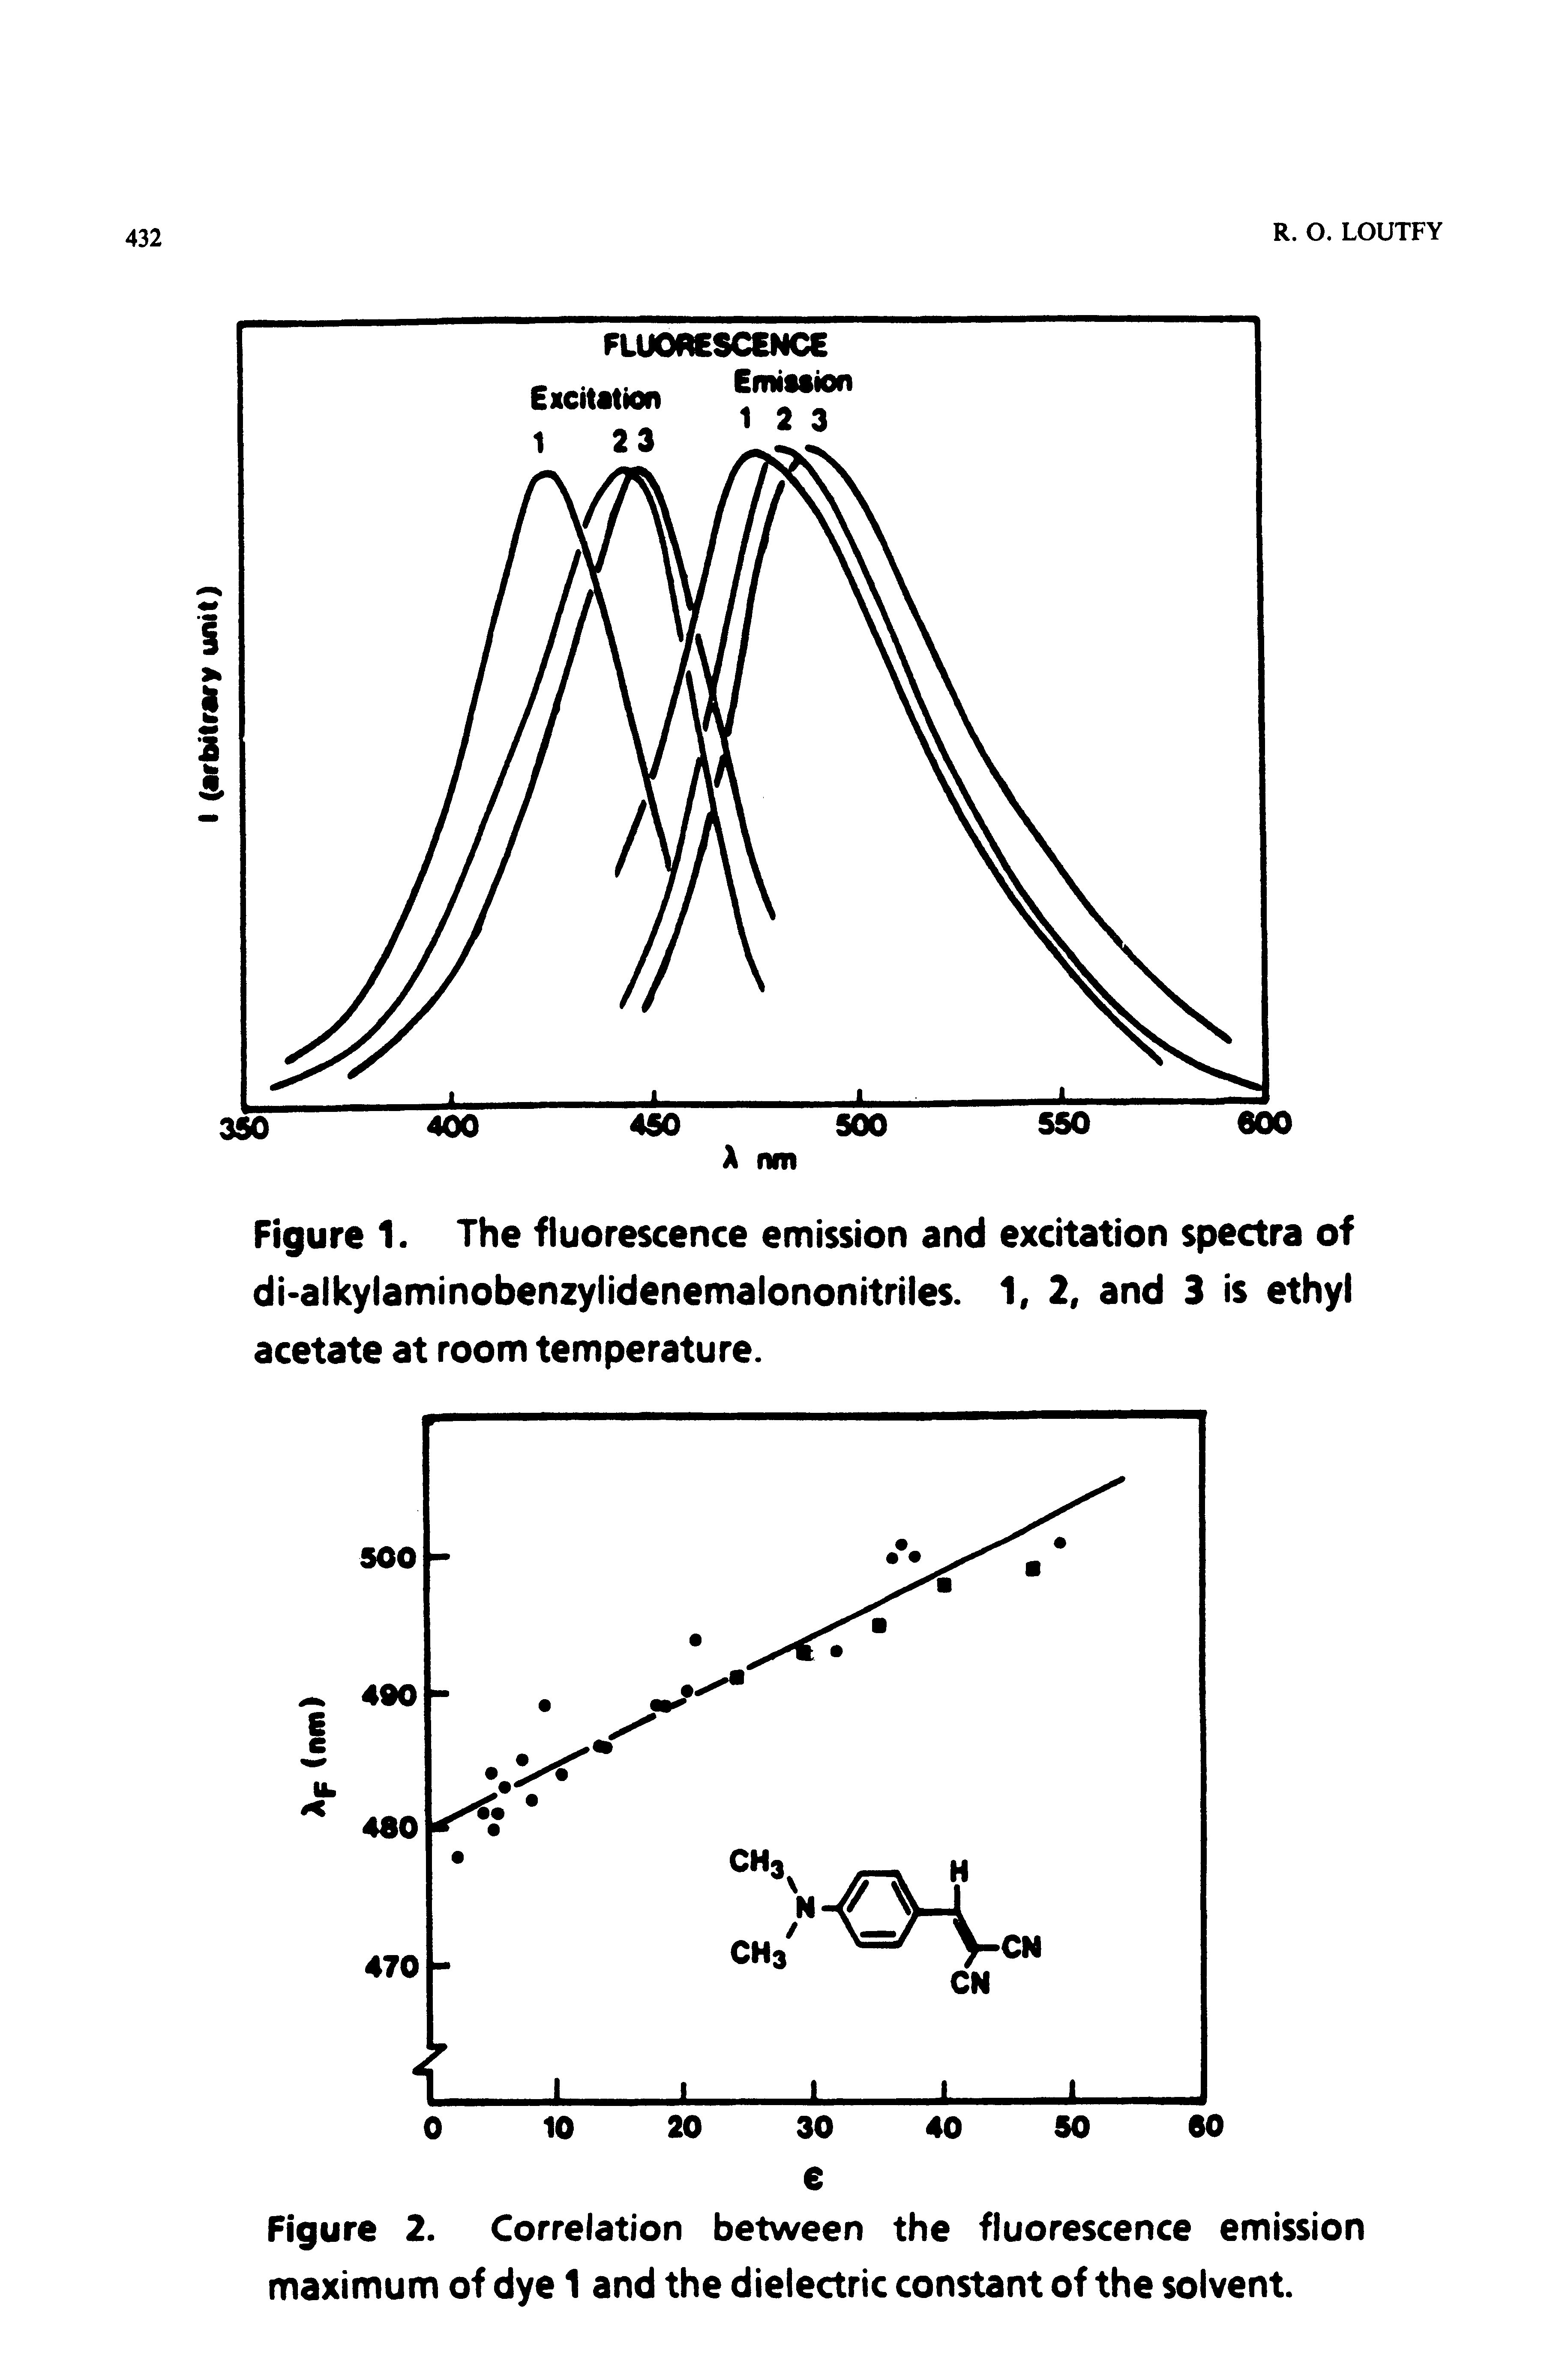 Figure 1. The fluorescence emission and excitation spectra of di aikyiaminobenzylidenemalononitriies. 1, 2, and 3 is ethyl acetate at room temperature.